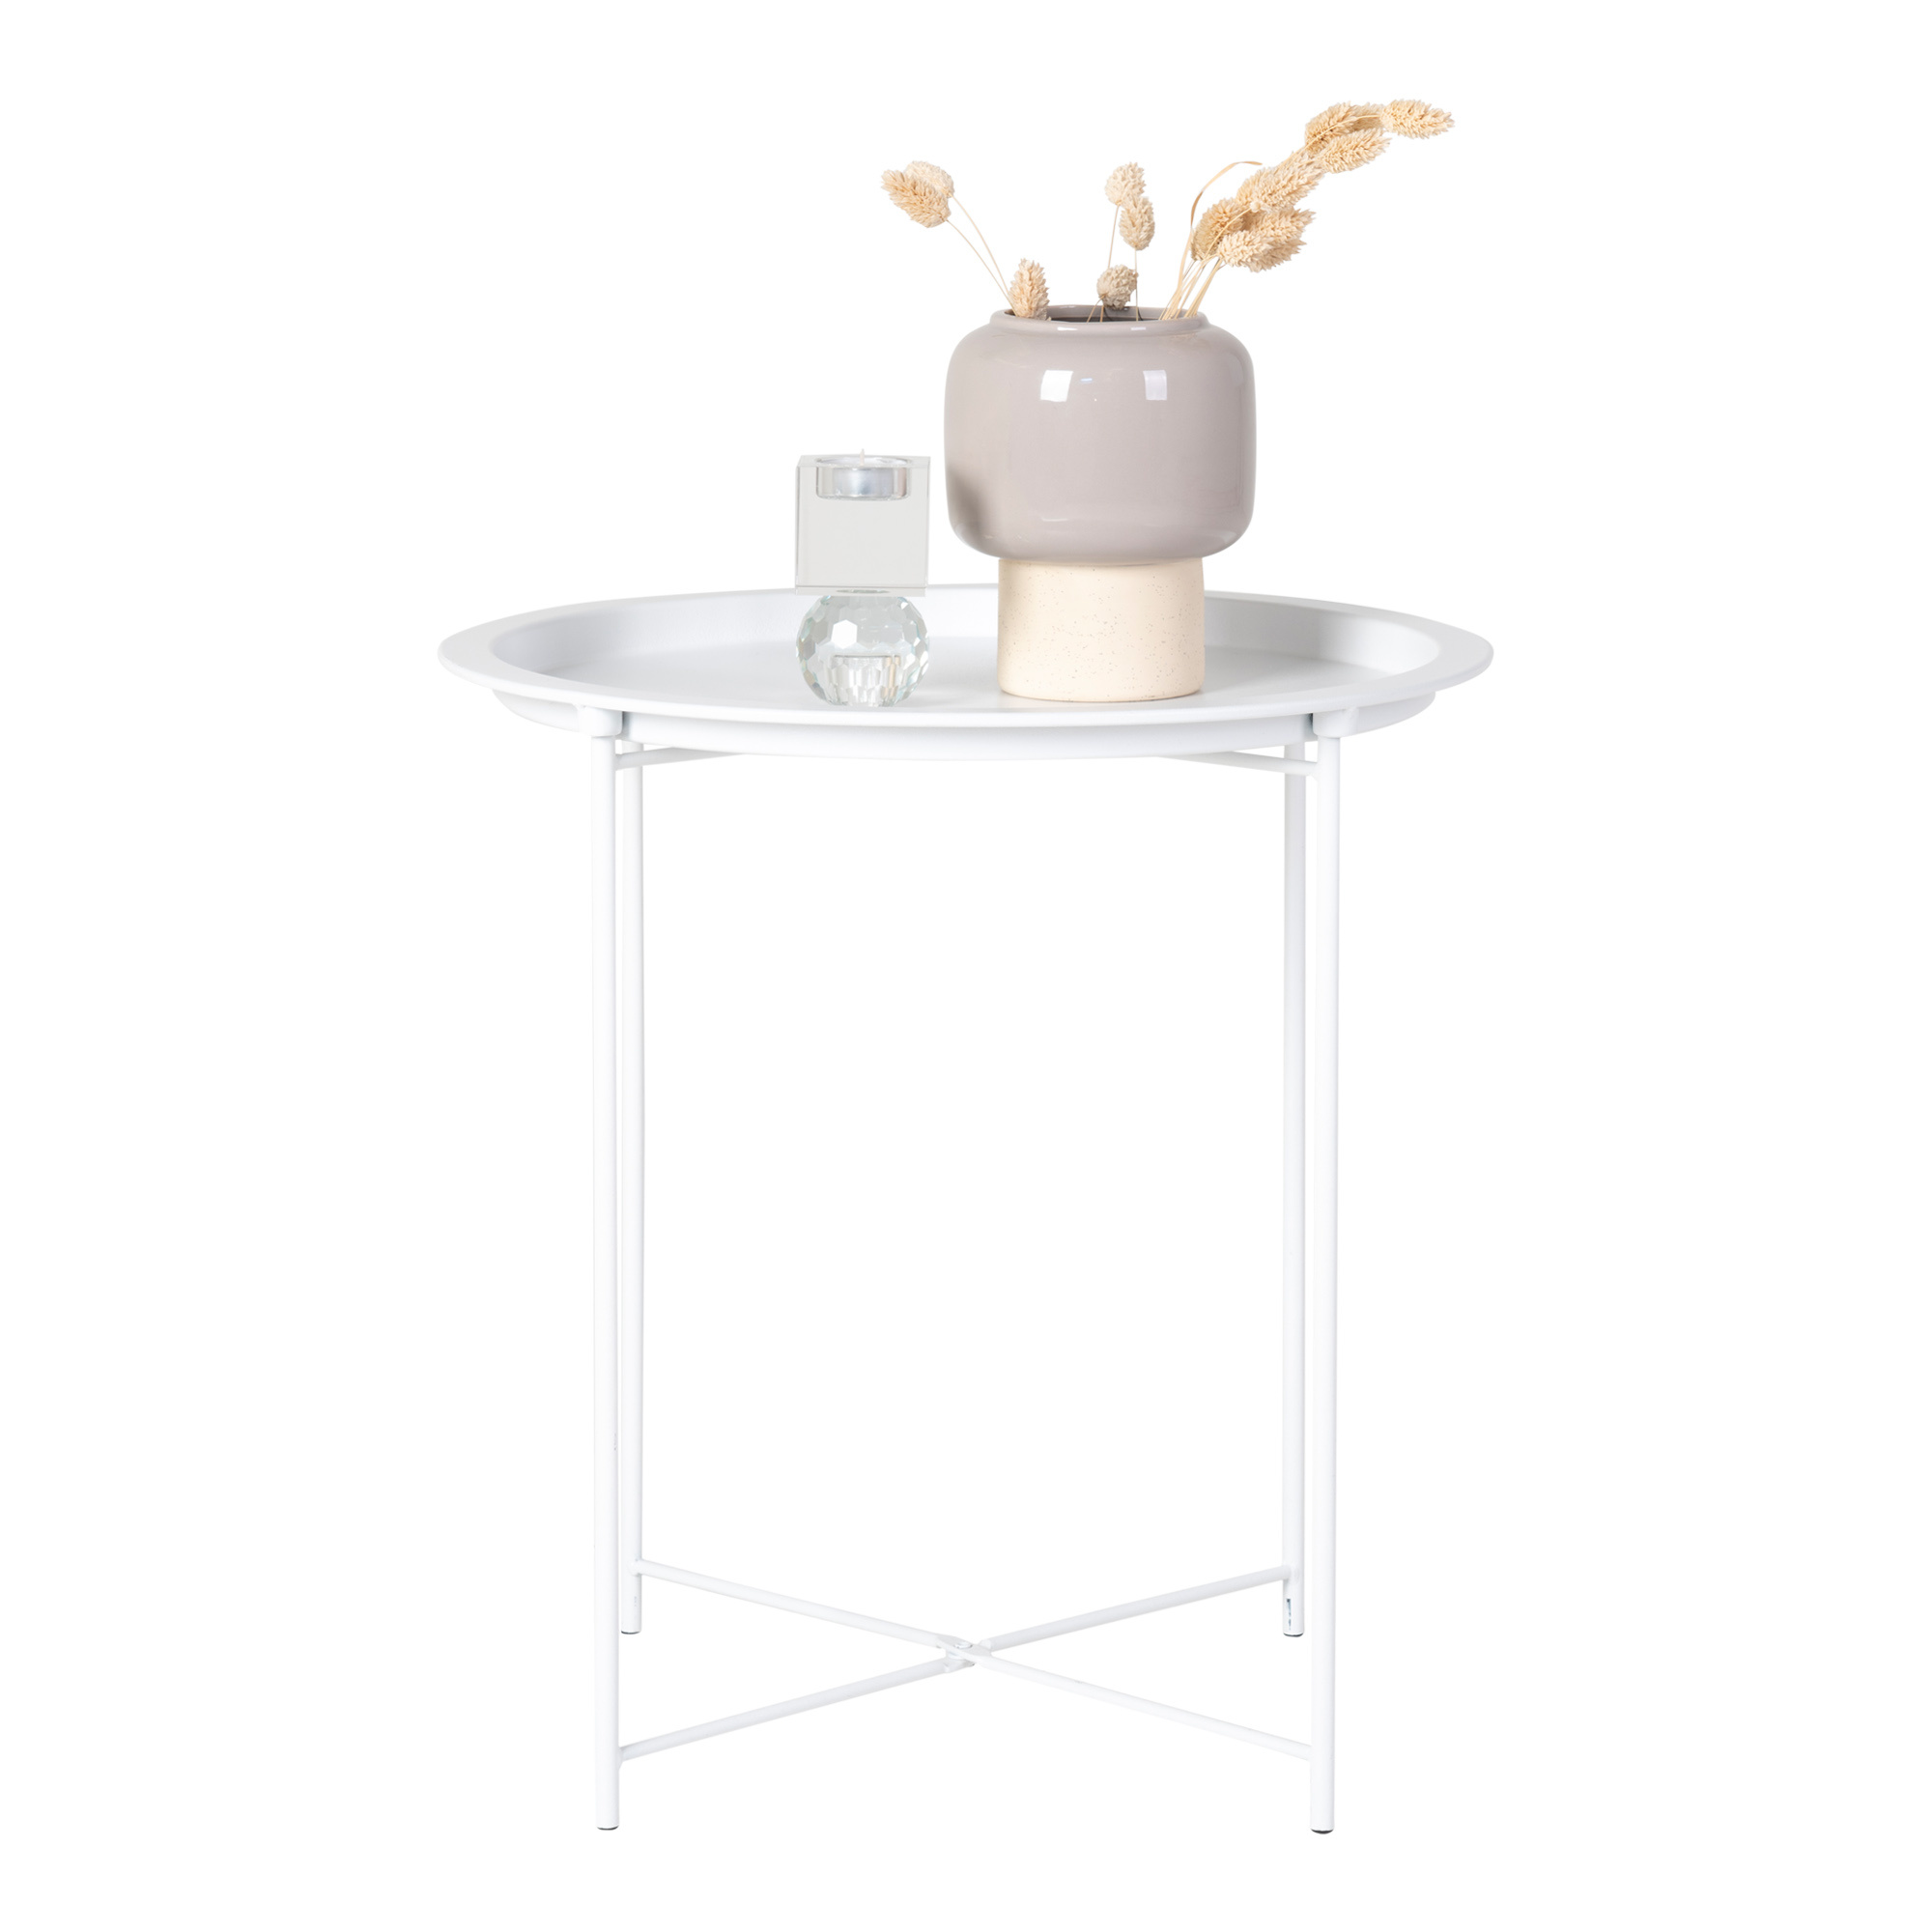 Bastia Side Table - Side table in white powdercoated steel